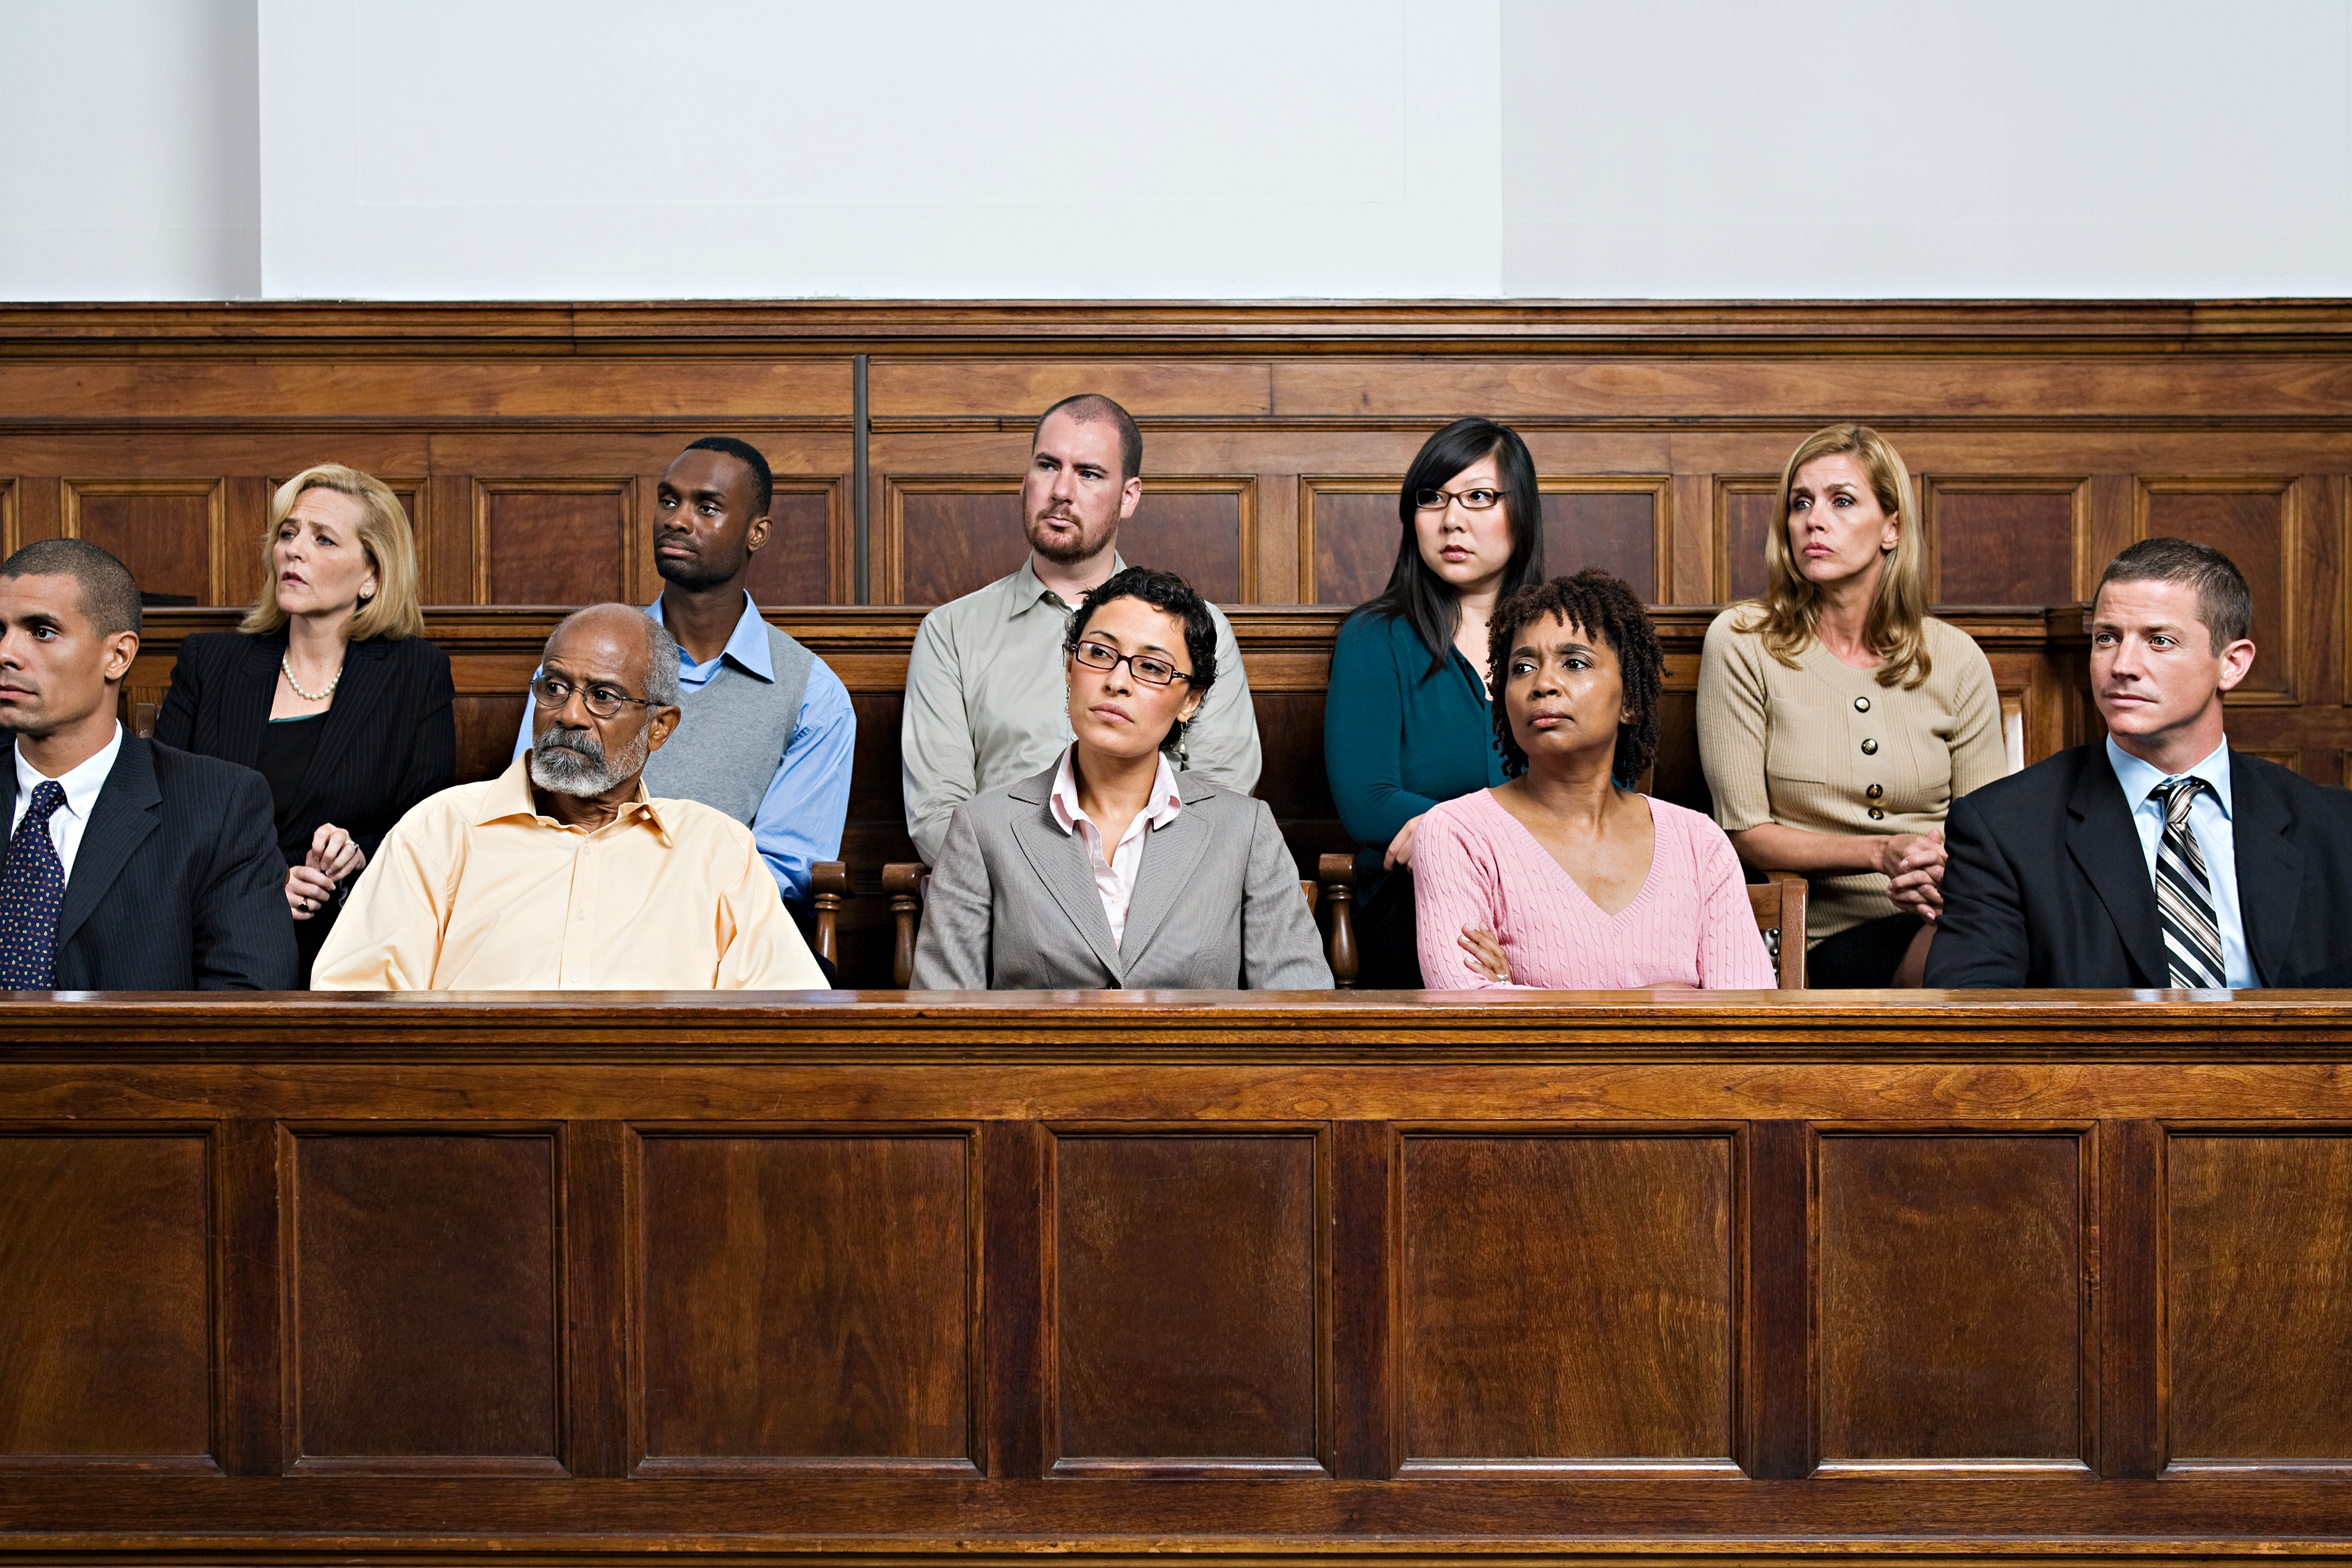 What's jury duty like? The verdict, well, it's case by case